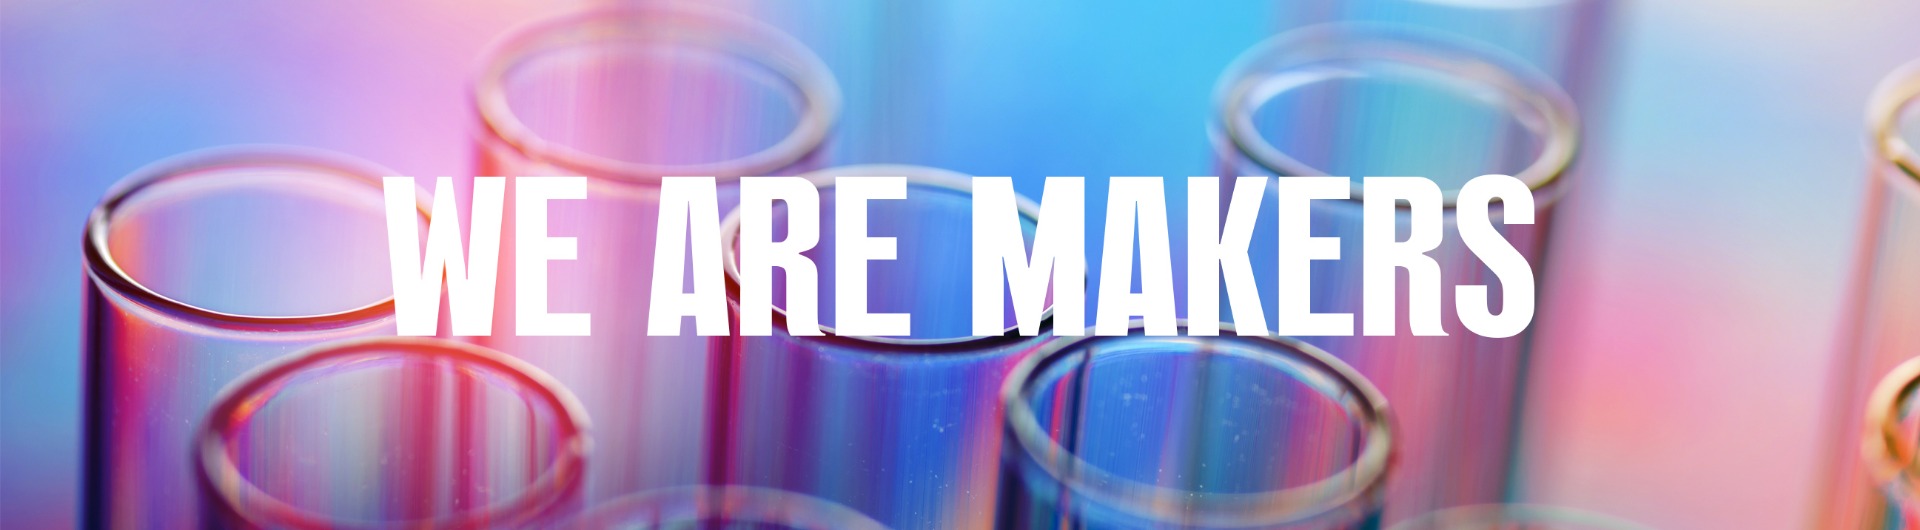 we are makers